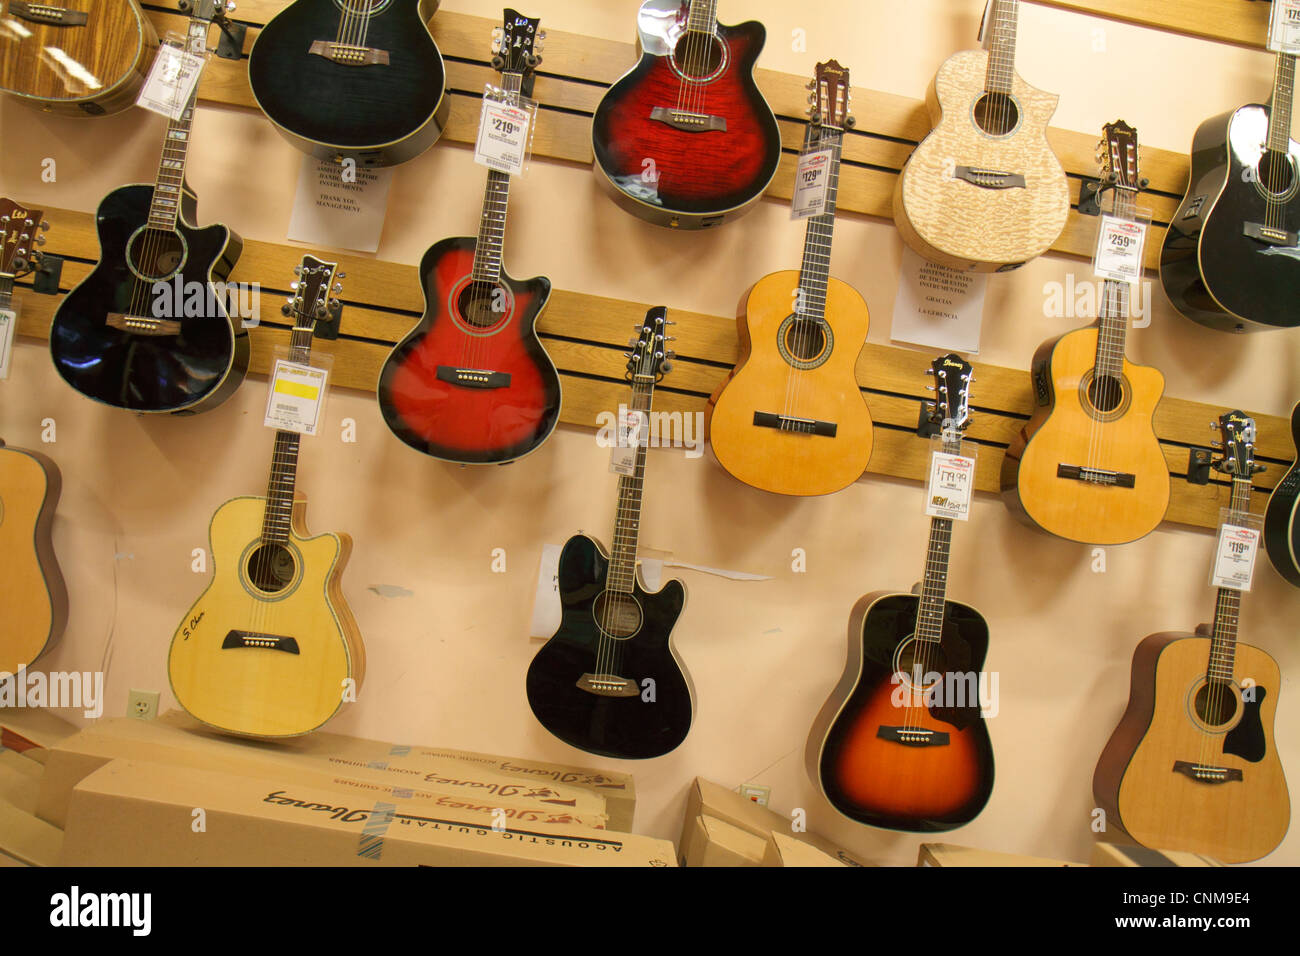 Miami Florida,Sweetwater,Dolphin Mall,Sam Ash Music,musical instruments,acoustic guitars,display case sale,shopping shopper shoppers shop shops market Stock Photo